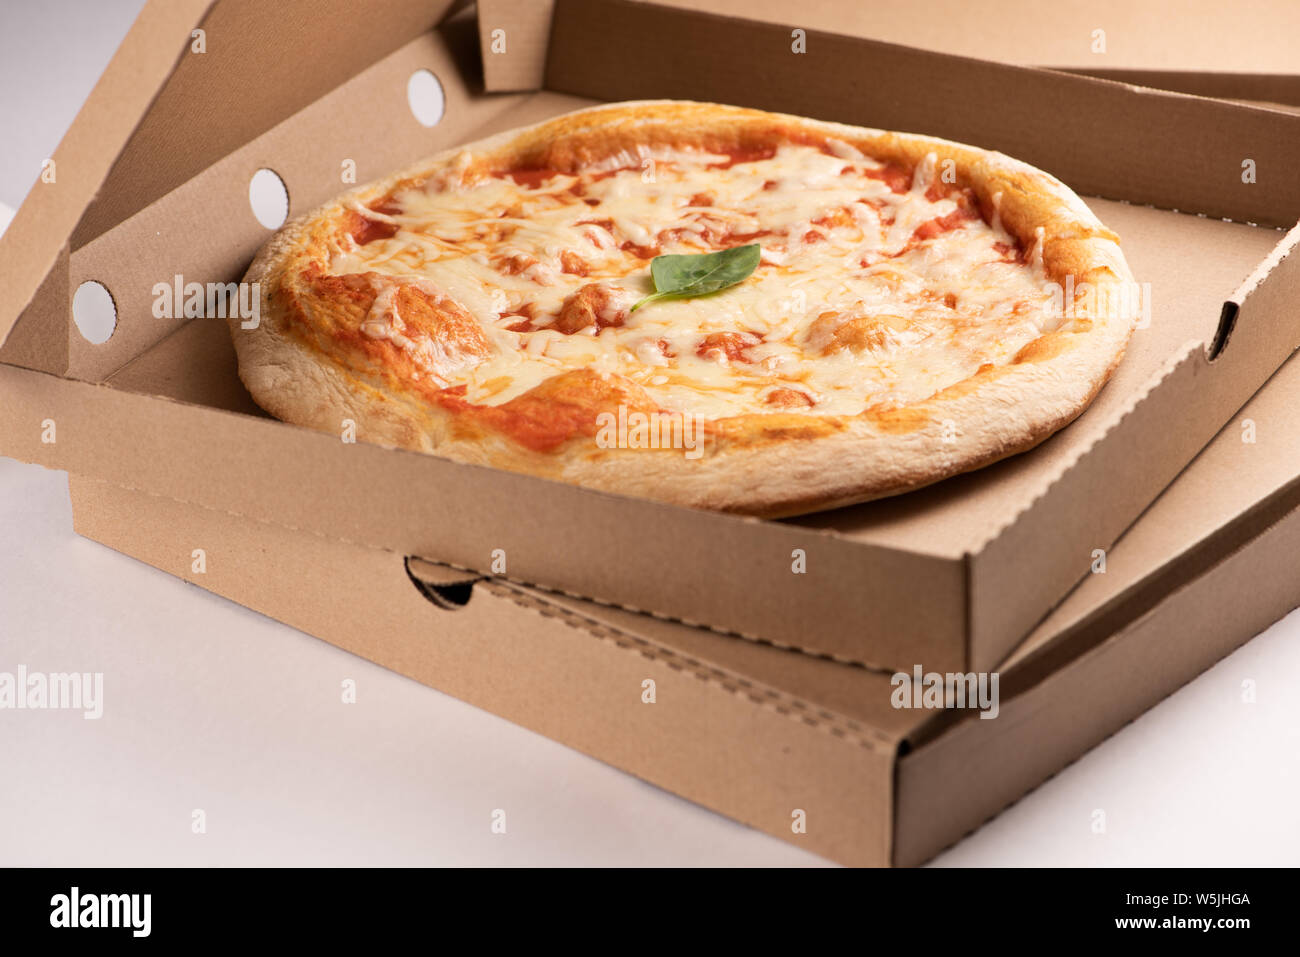 Pizza delivery. Pizza menu, pizza margherita on box for take away or delivery Stock Photo